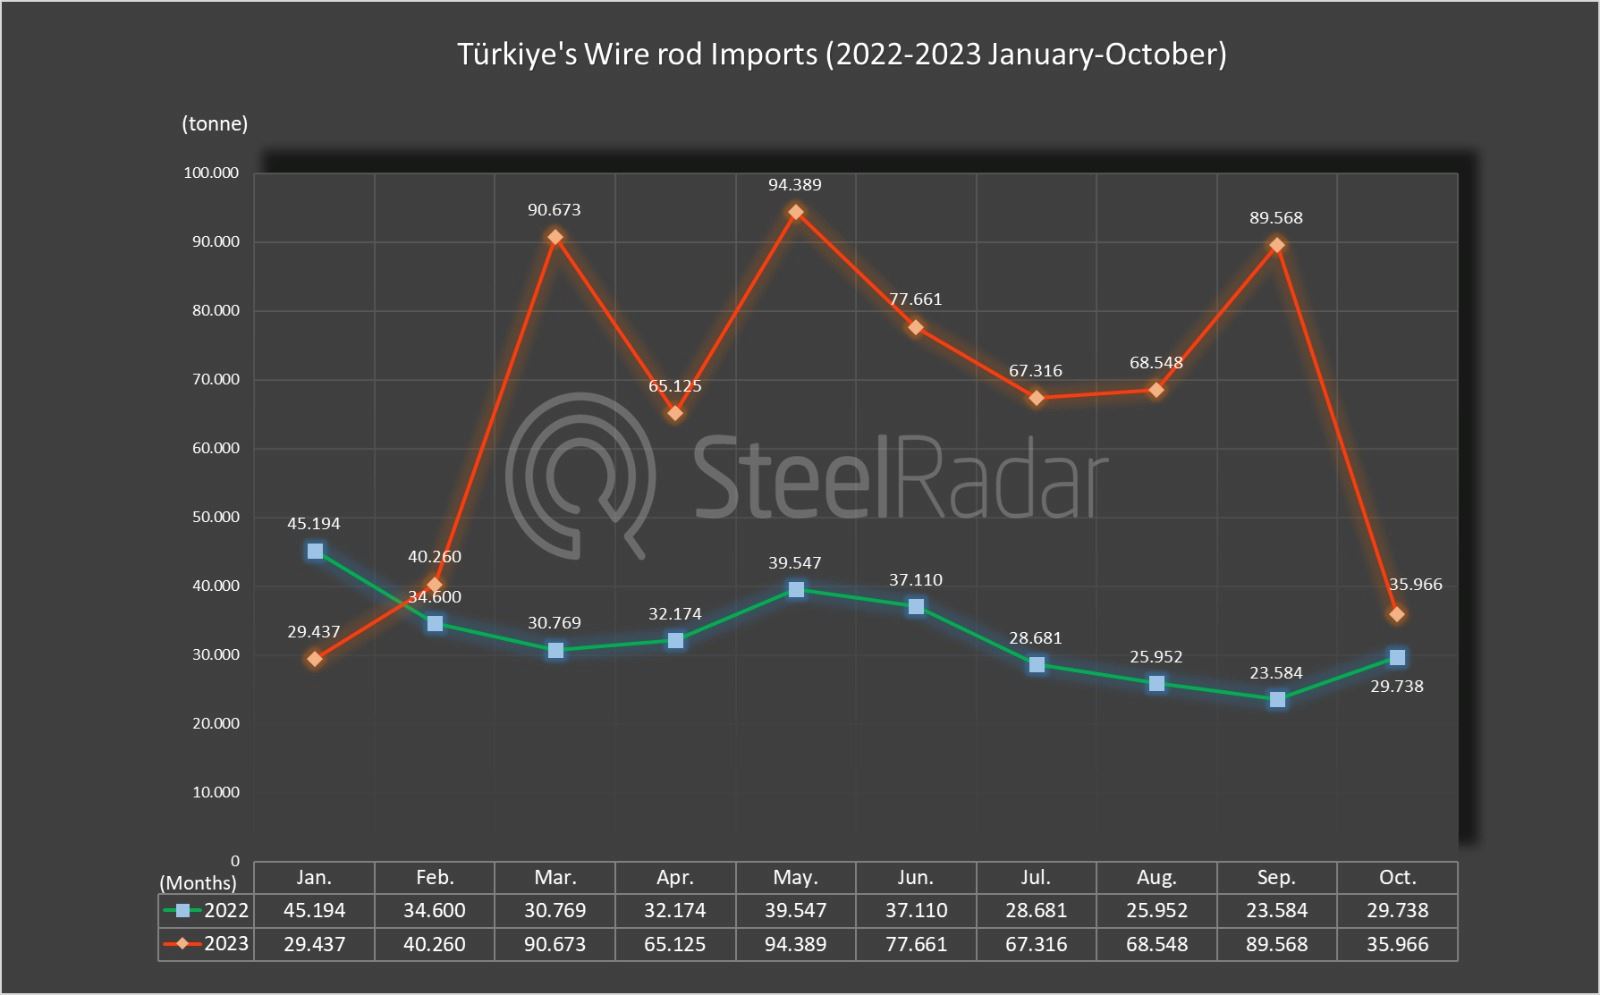 Türkiye's wire rod imports increased by 129.84% in 10 months